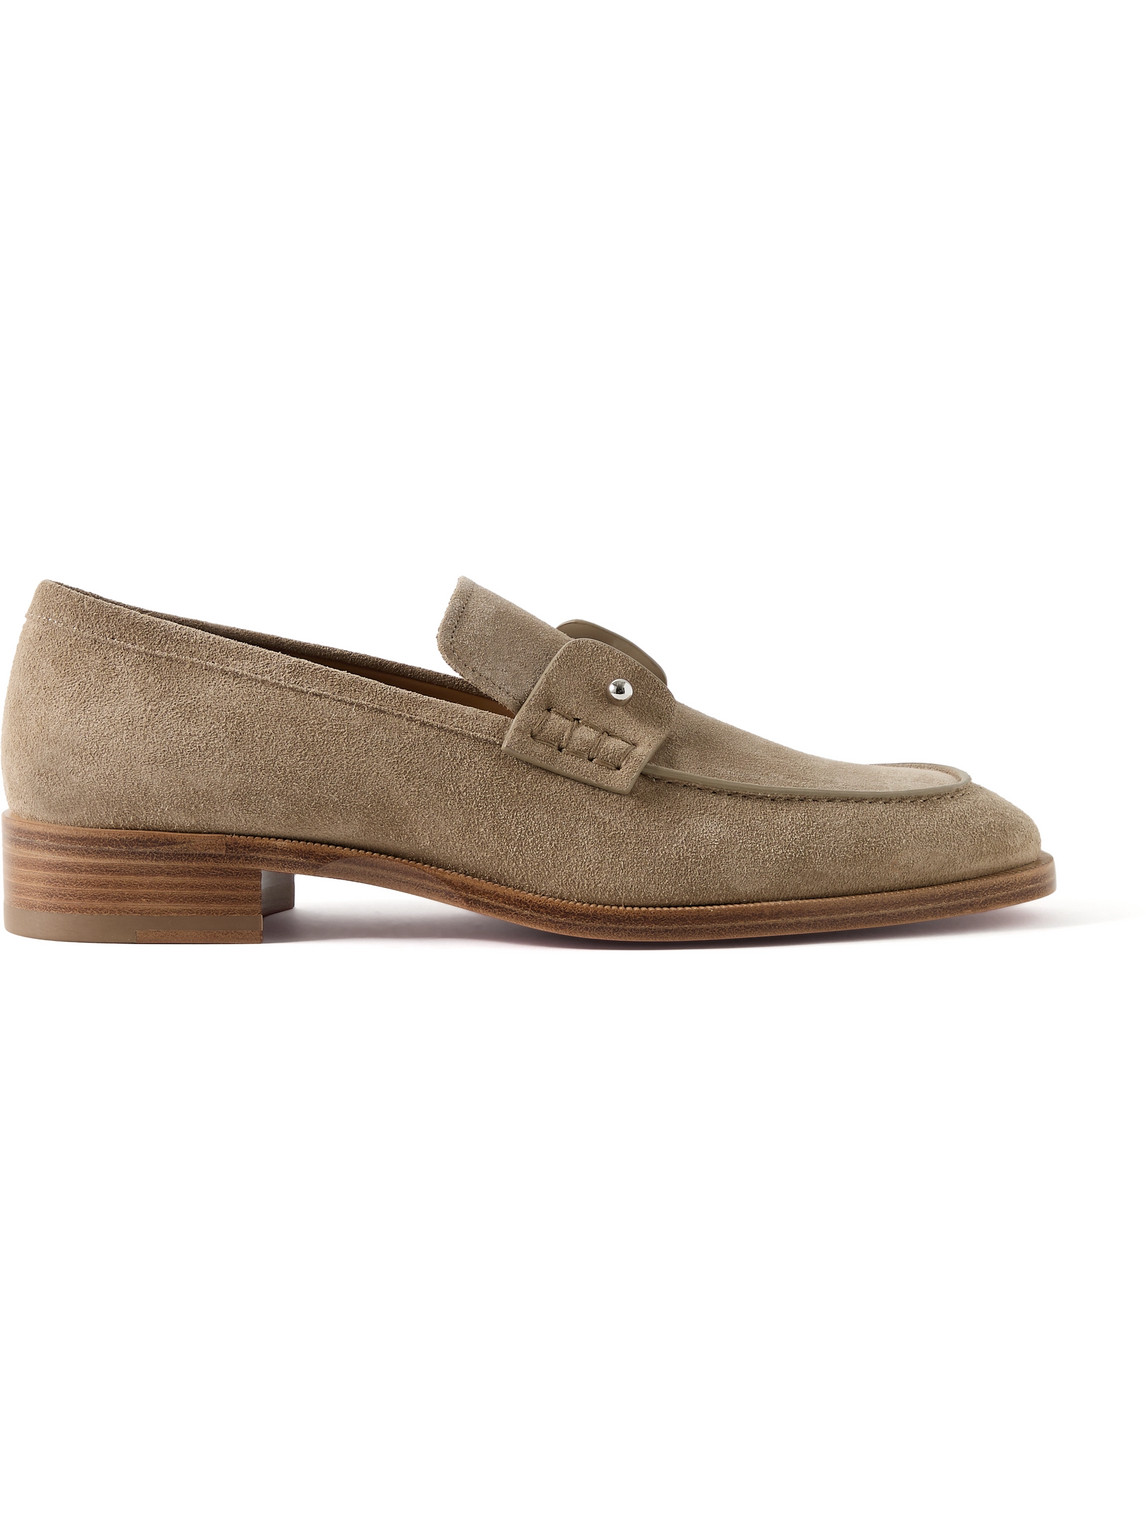 CHRISTIAN LOUBOUTIN CHAMBELIMOC SUEDE LOAFERS